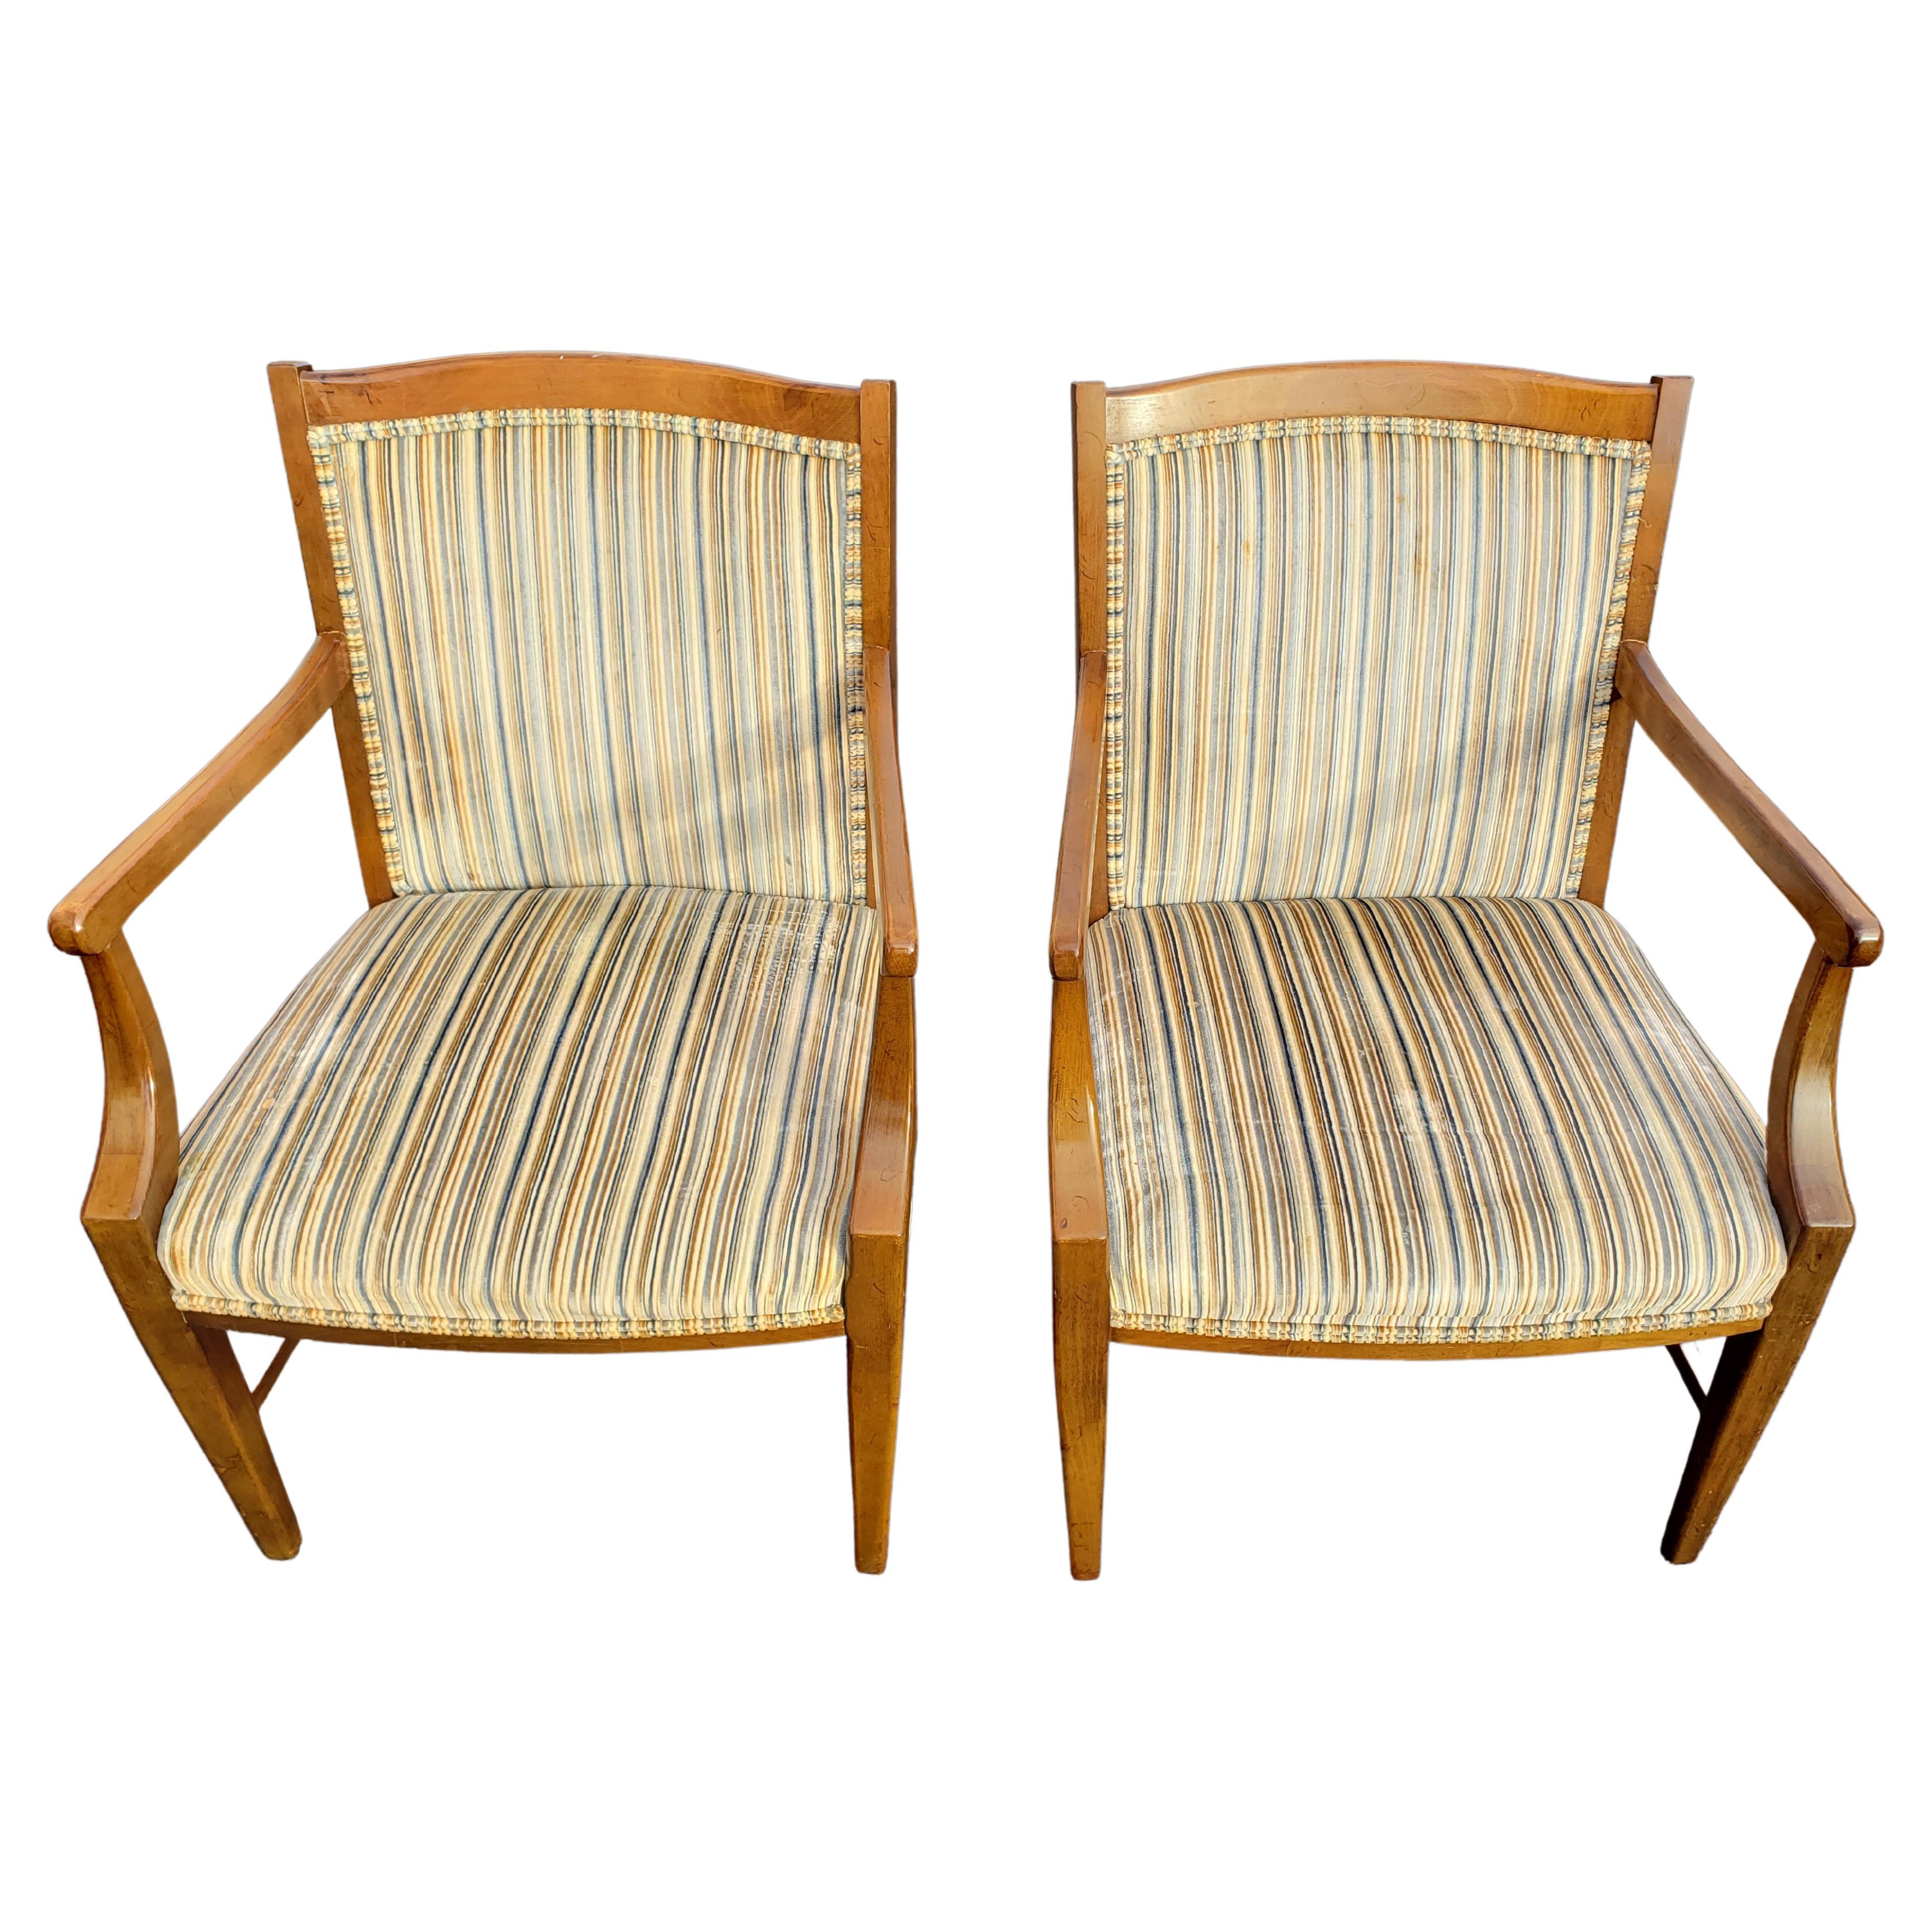 Pair of stateville ross upholstered maple armchairs, Circa 1970s. Seats in good condition. Clean striped upholstery. Measurements: 24